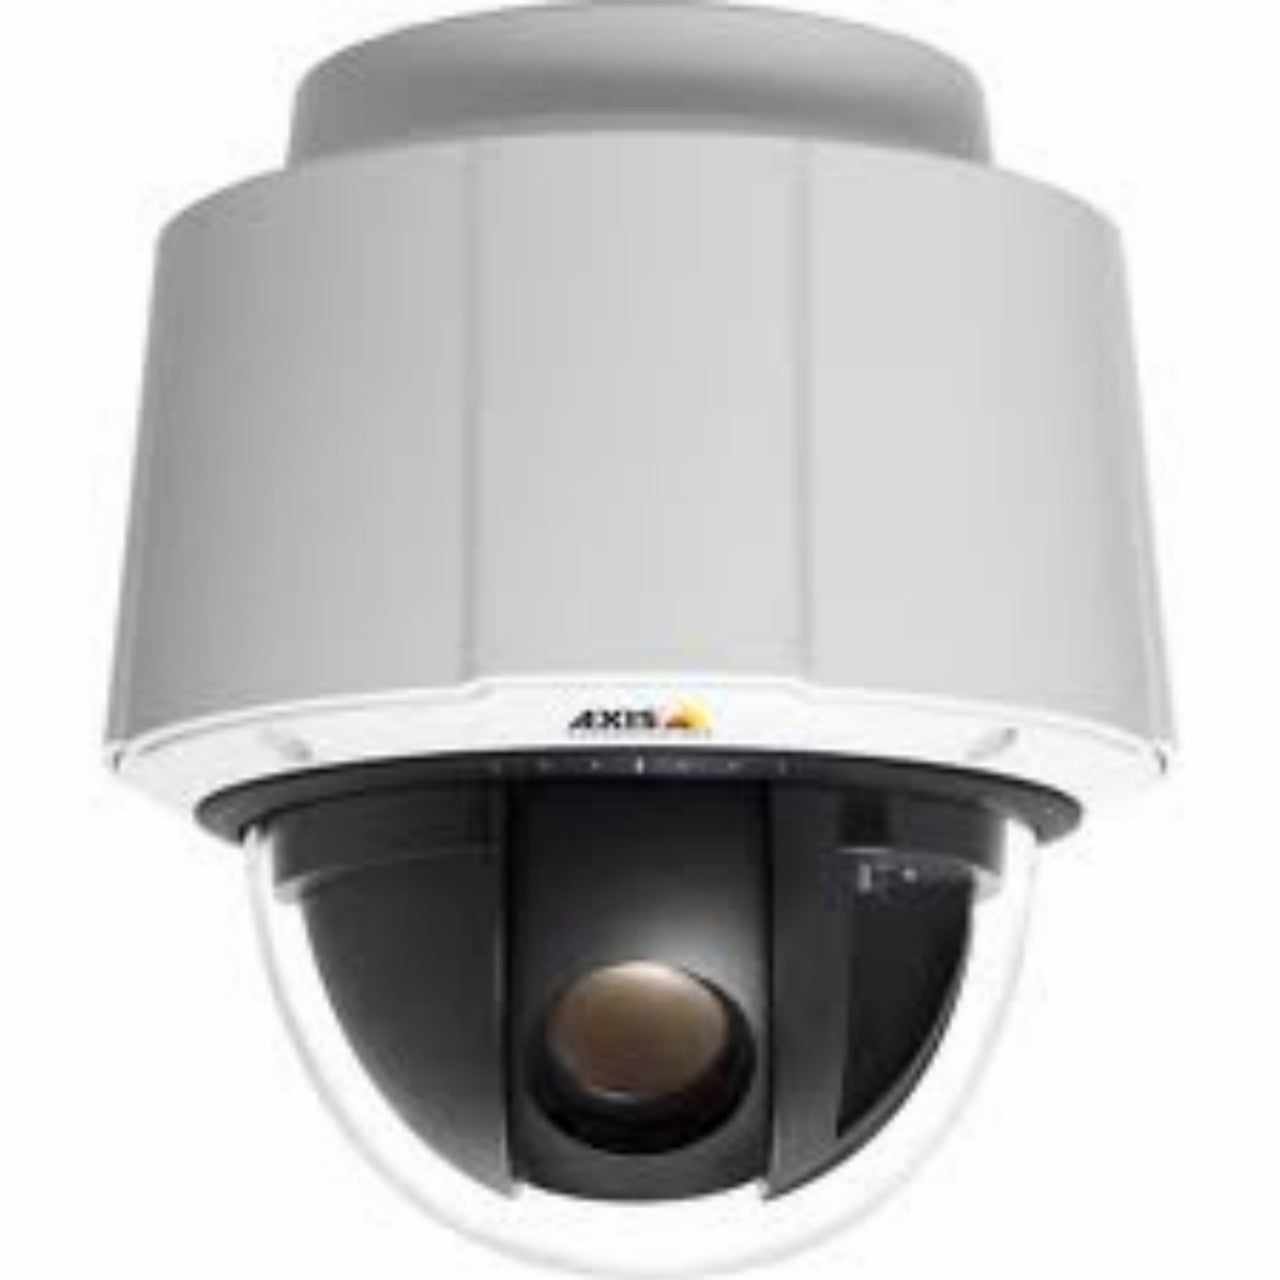 AXIS Q6035 (0444-004) PTZ Dome Network Camera